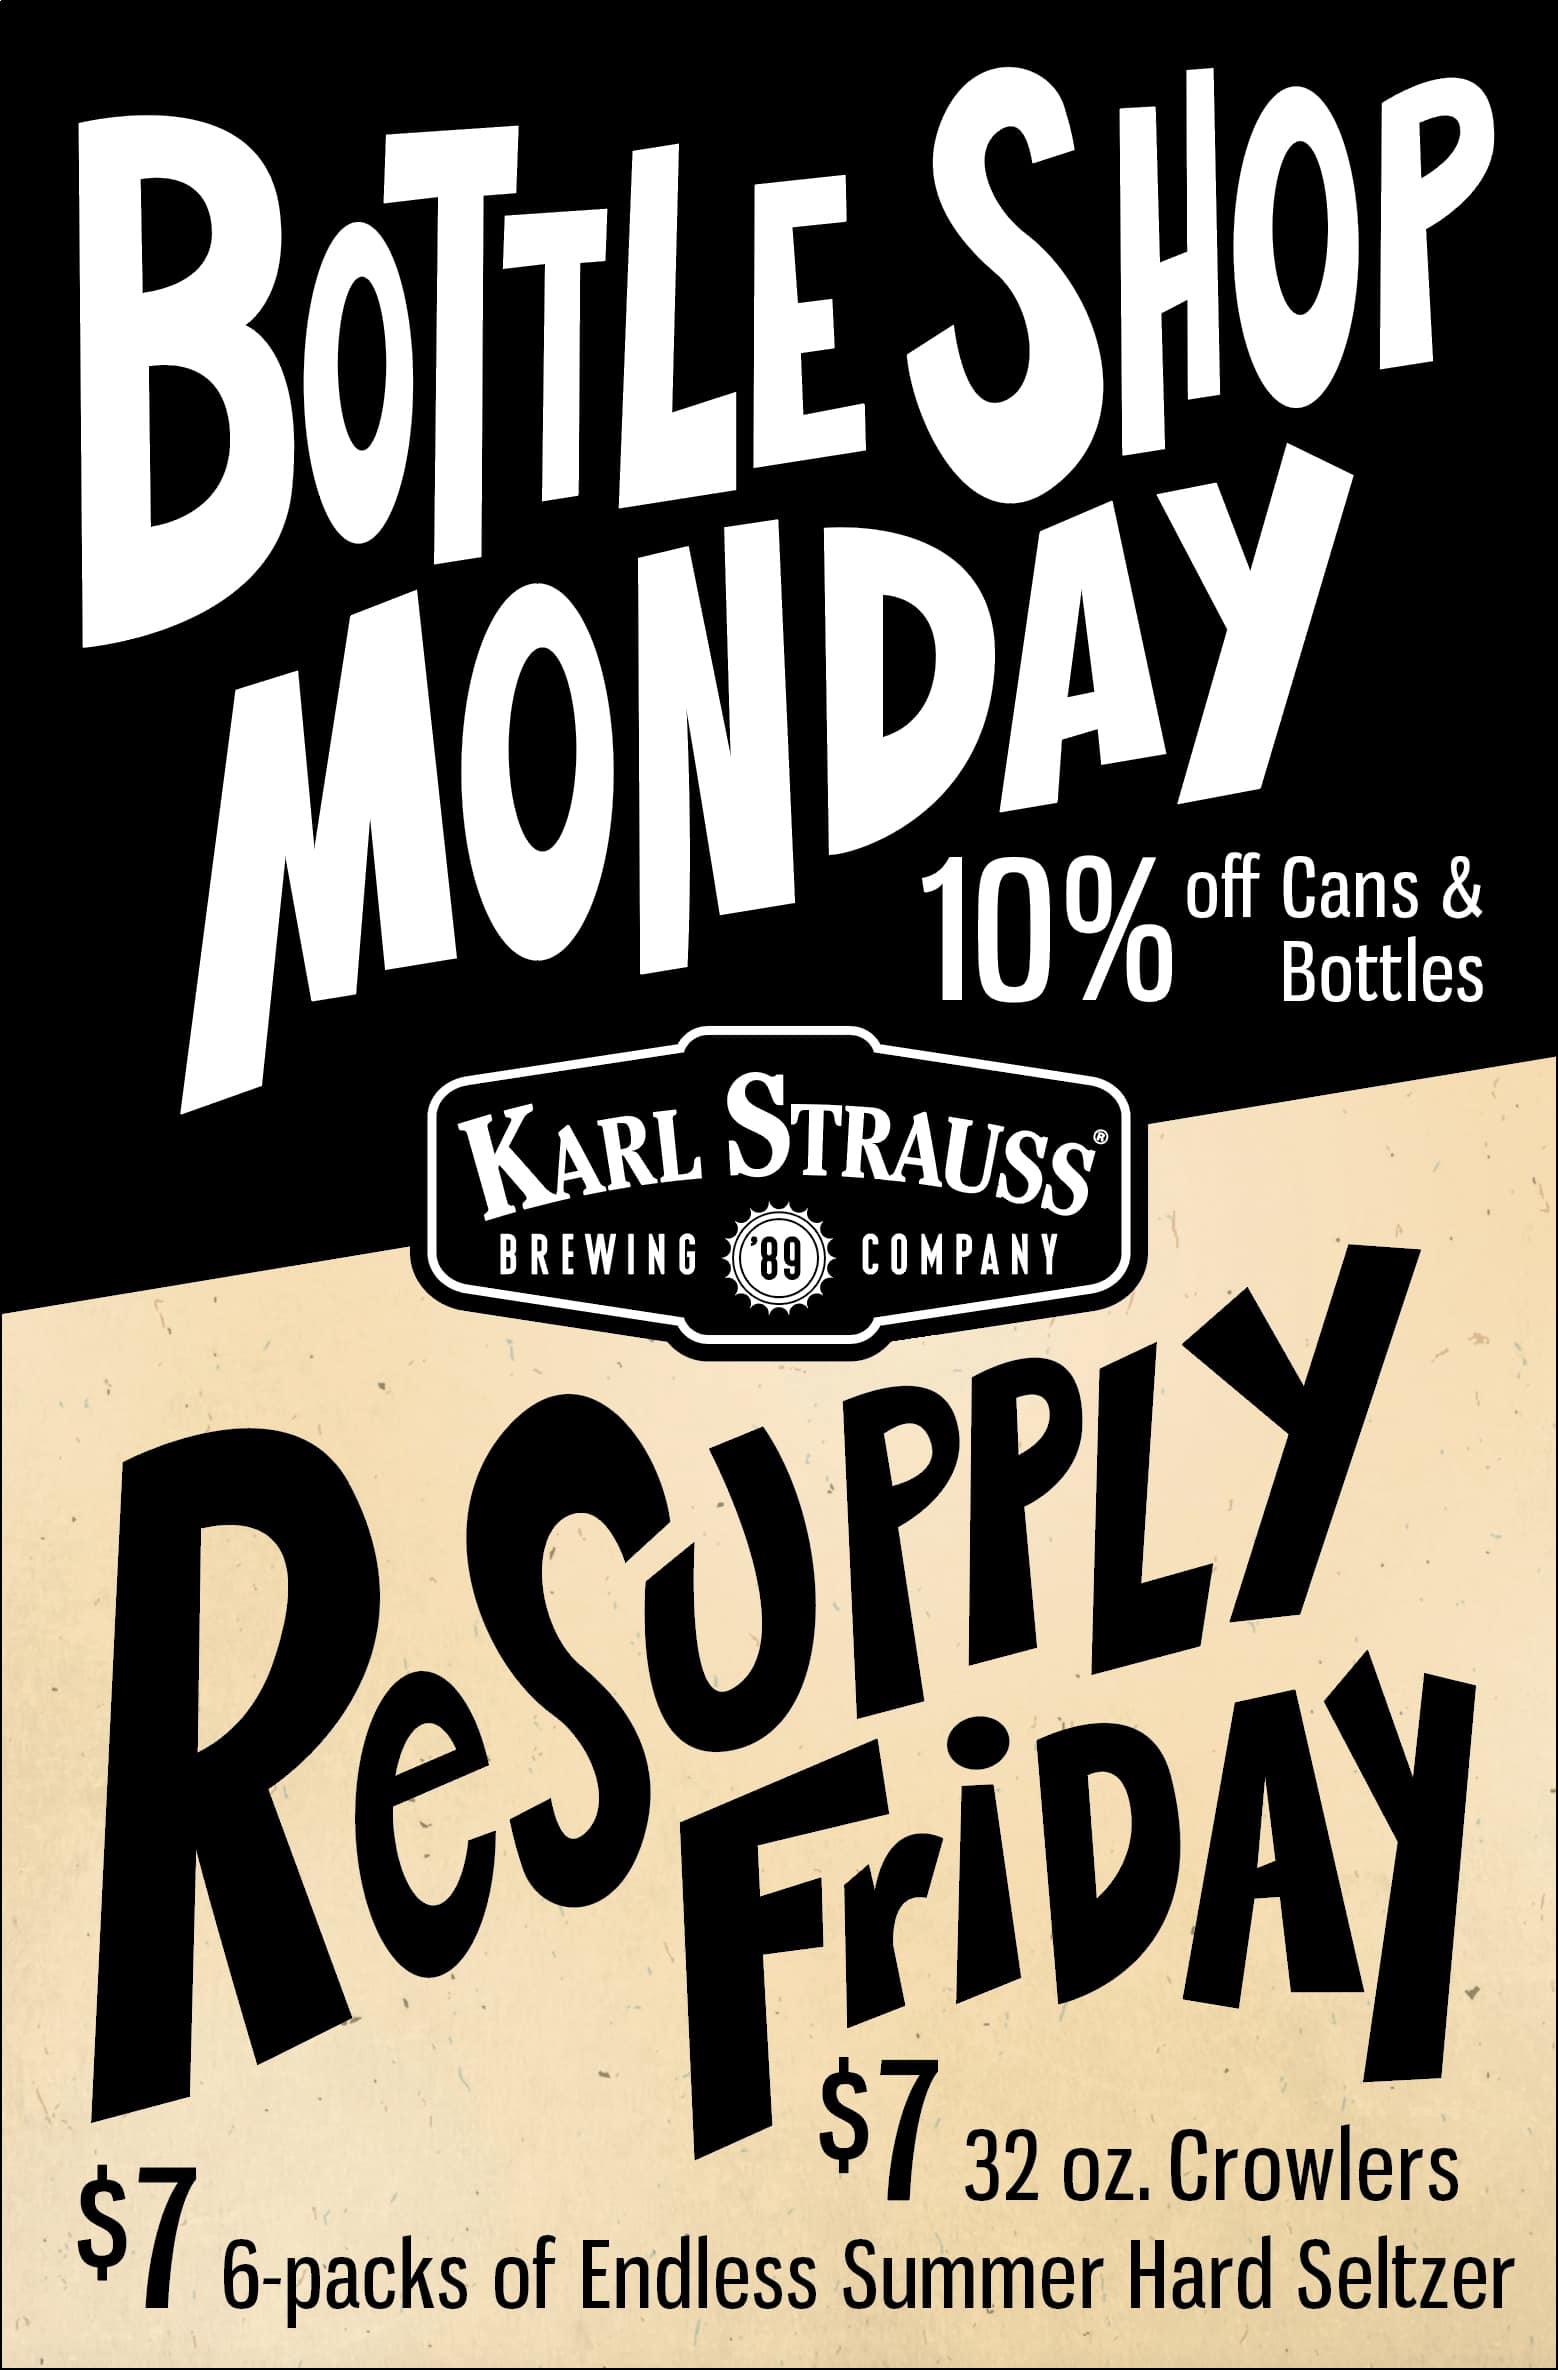 Karl Strauss Weekly Specials Poster